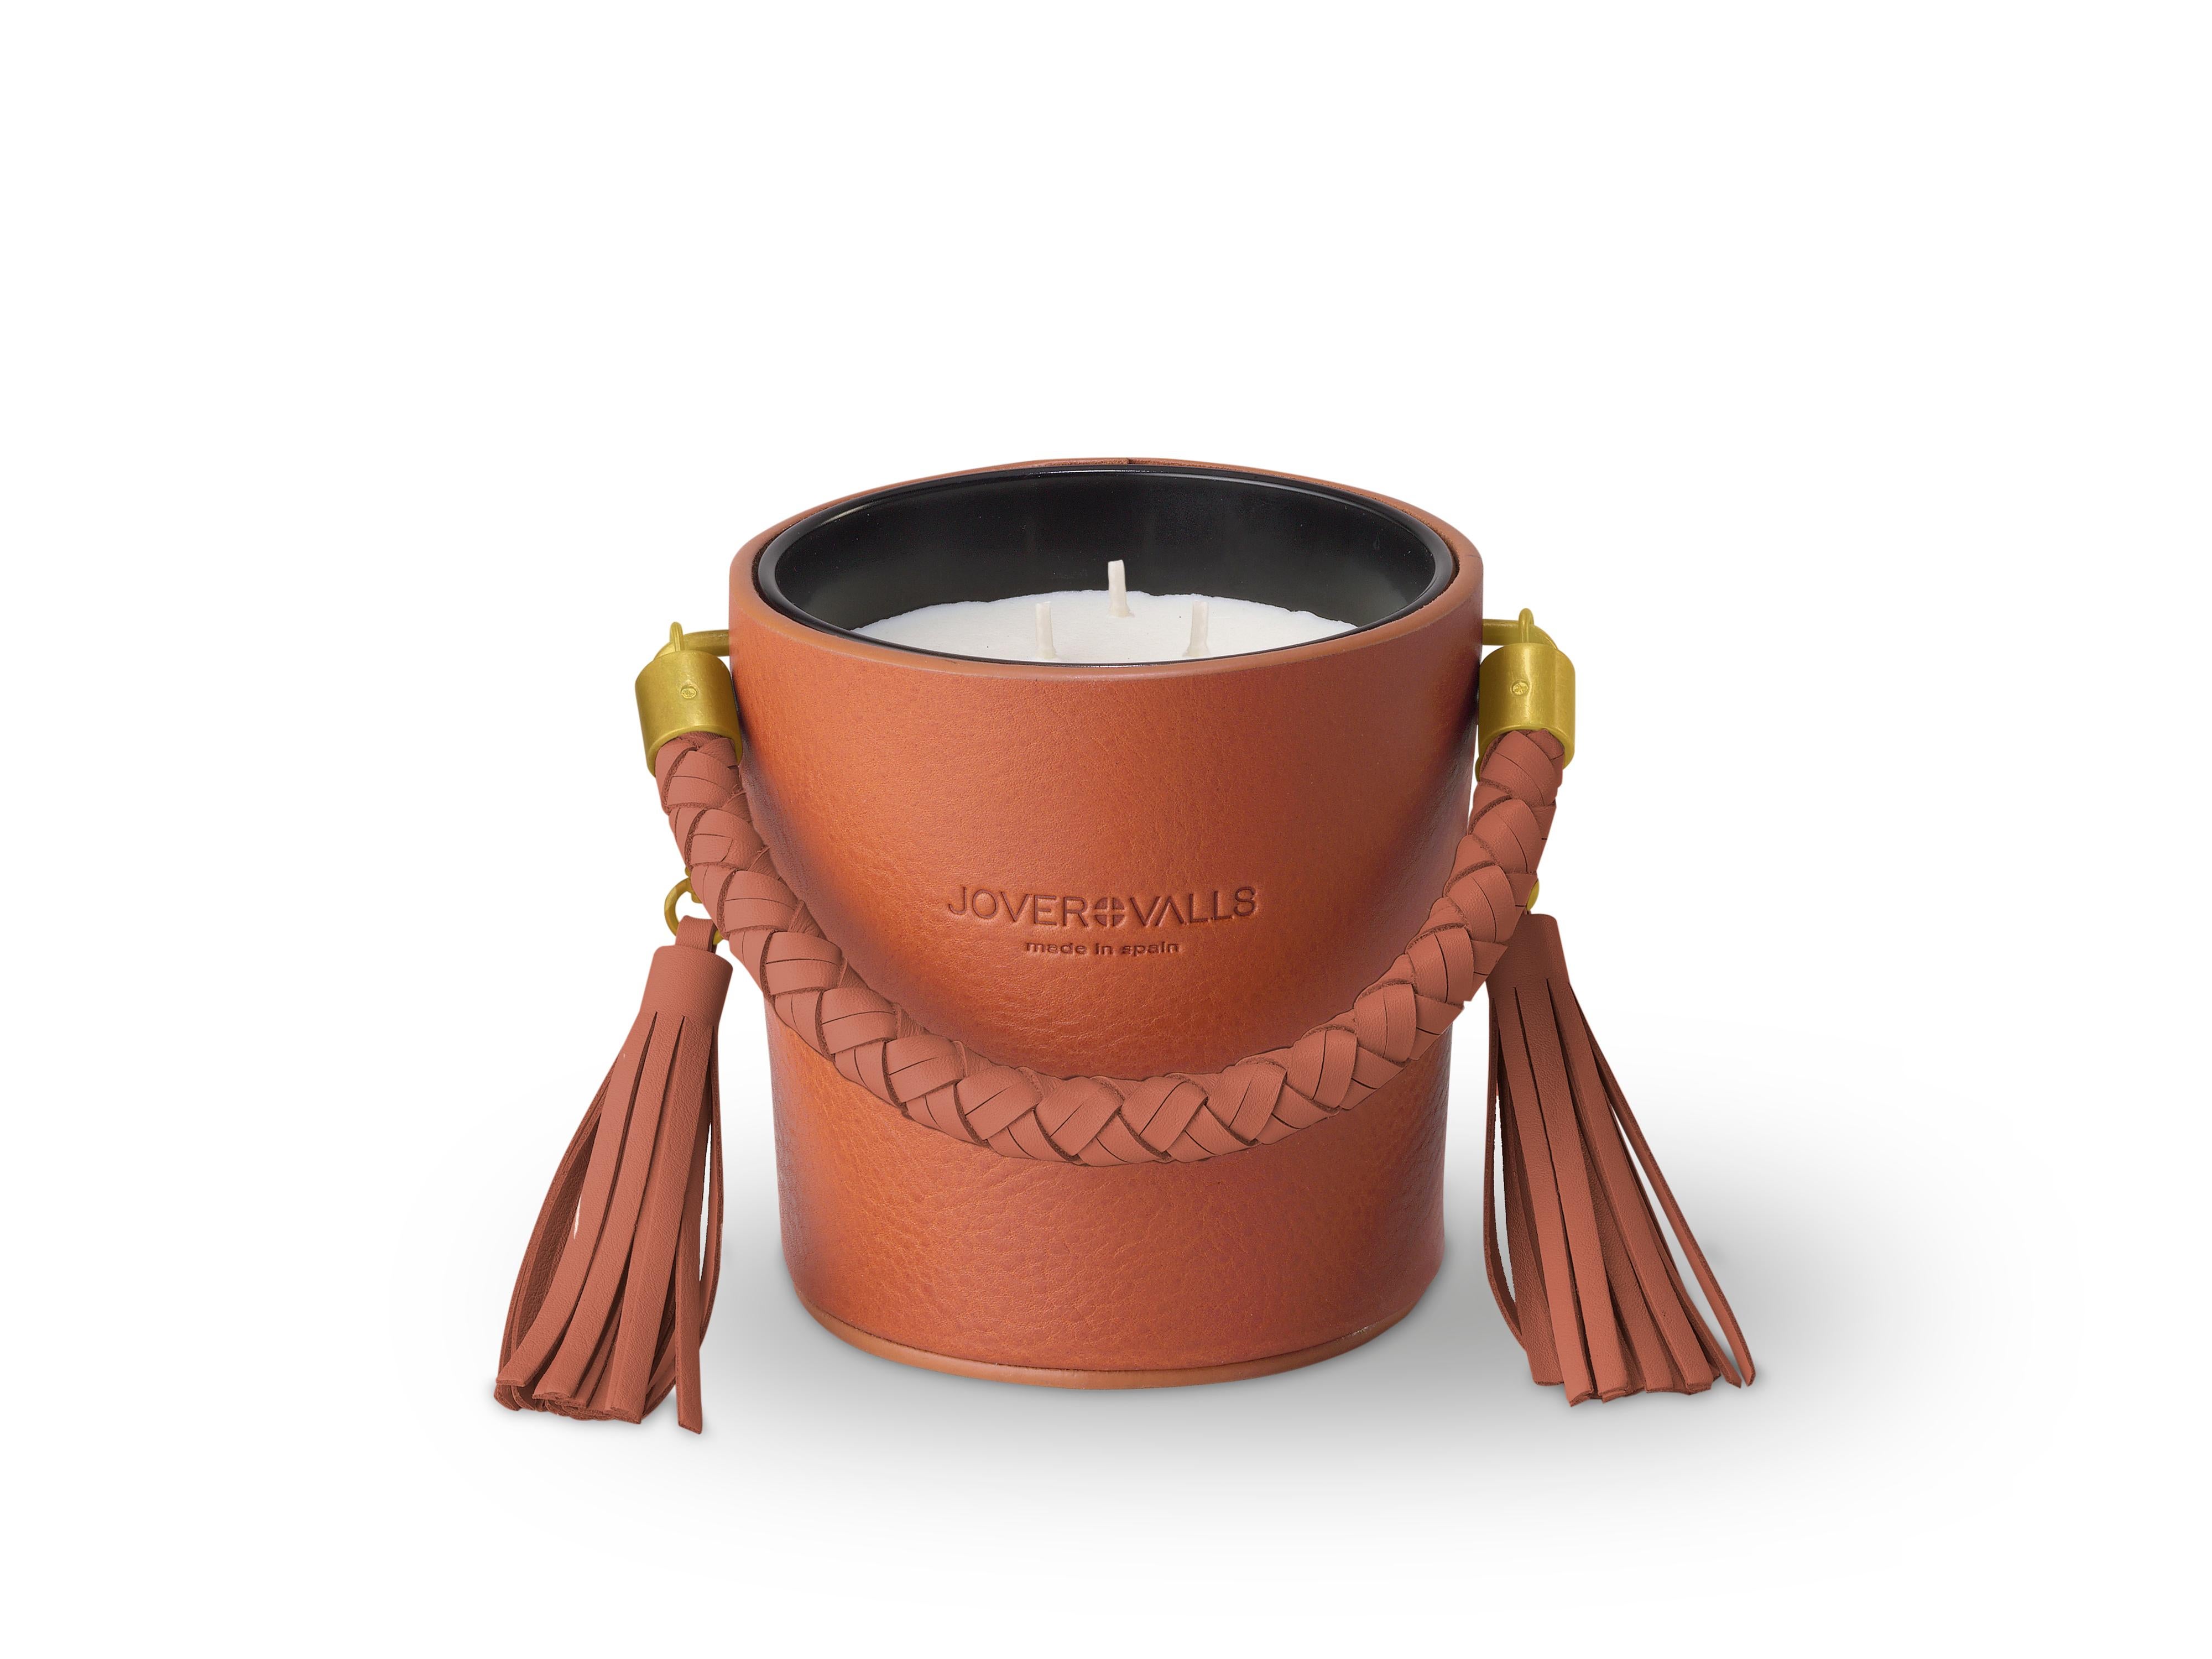 Spanish Bucket, Dark Brown Leather Candleholder, Oud Wood & Roses Scented Candle 21 Oz.  For Sale